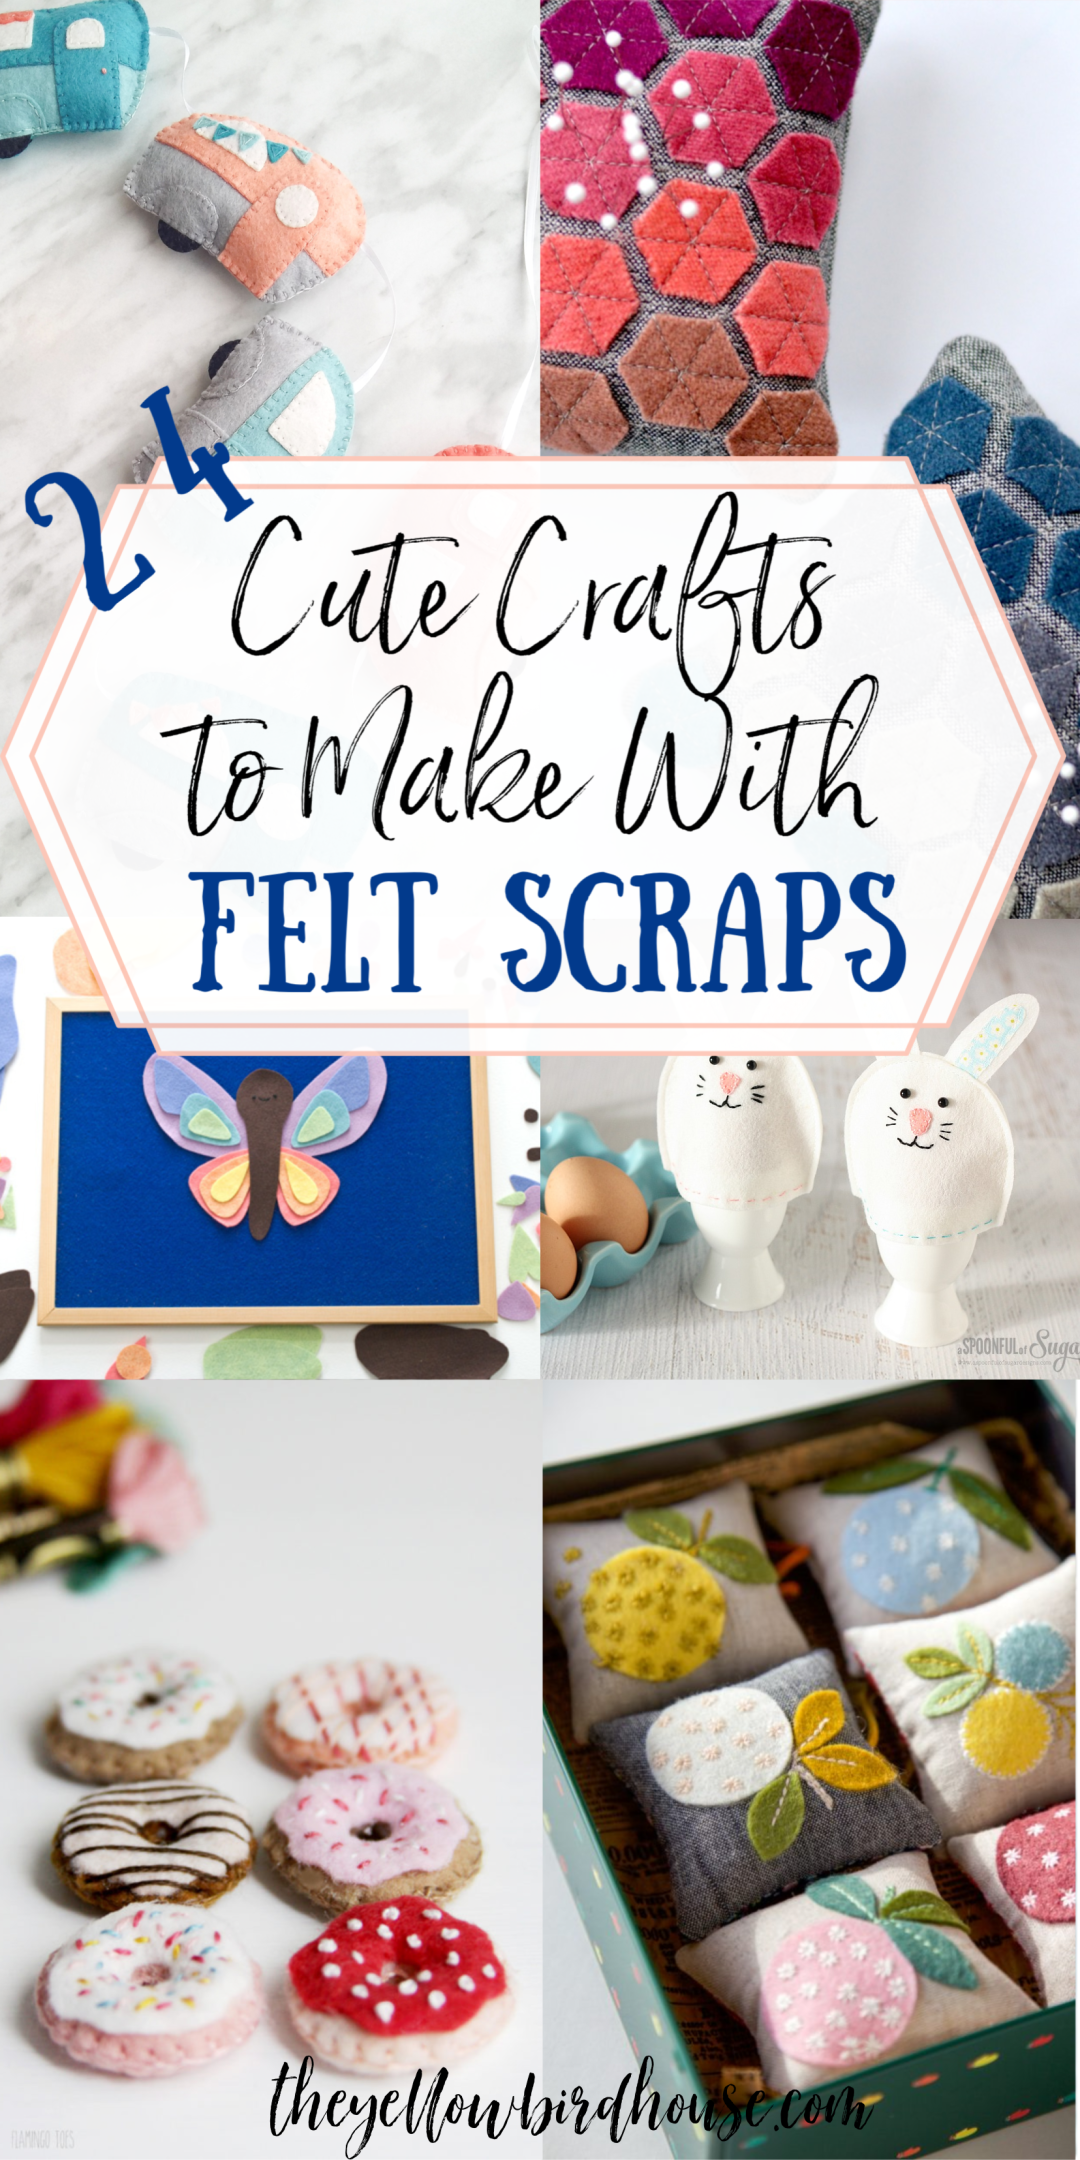 24+ Cute Crafts to Make with Felt Scraps | The Yellow Birdhouse - 24+ Cute Crafts to Make with Felt Scraps | The Yellow Birdhouse -   23 fabric crafts for kids to make ideas